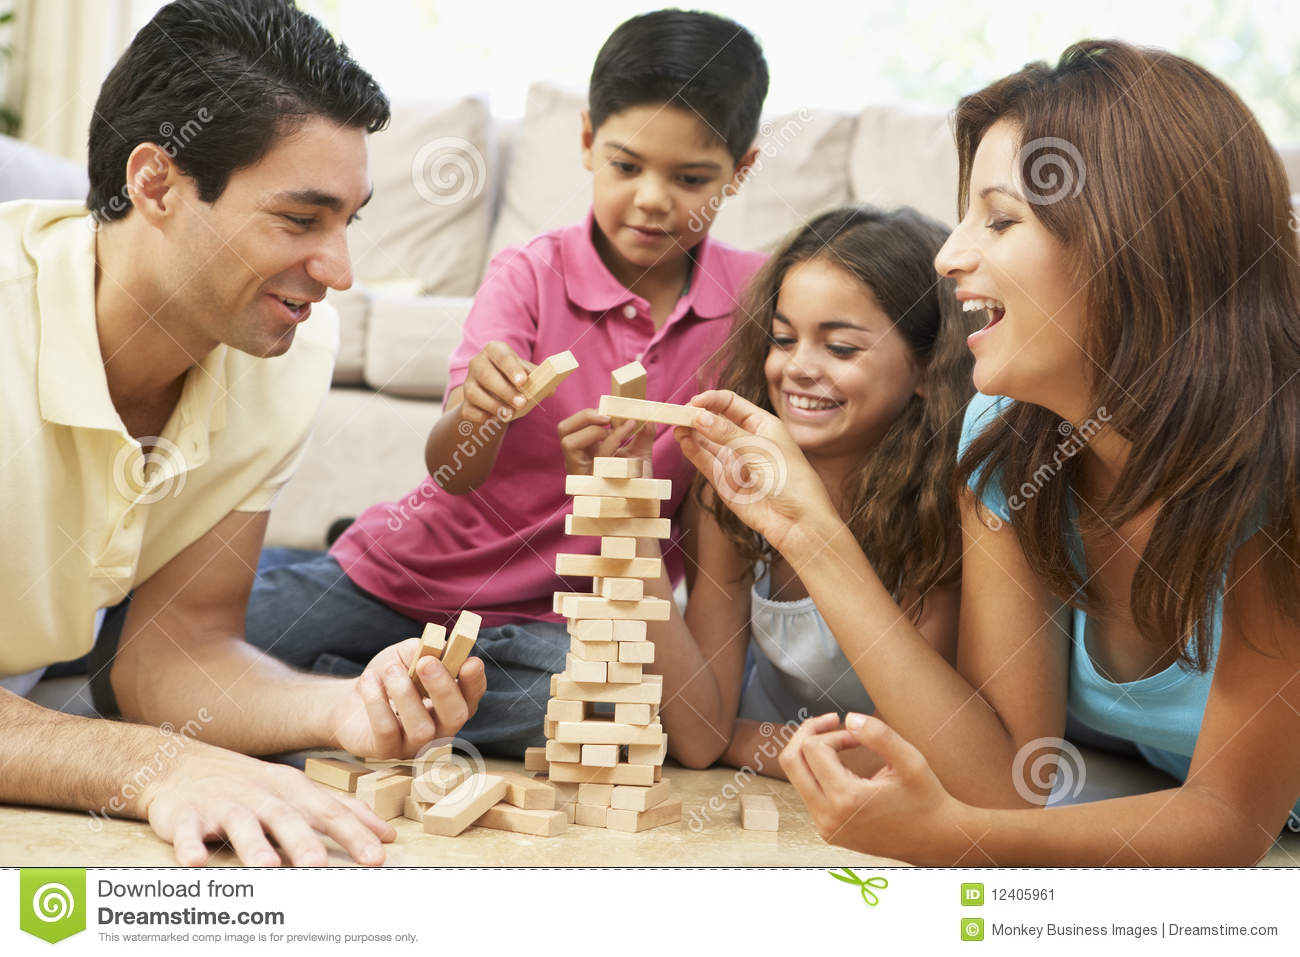 Family Playing Game Together At Home Stock Image   Image  12405961